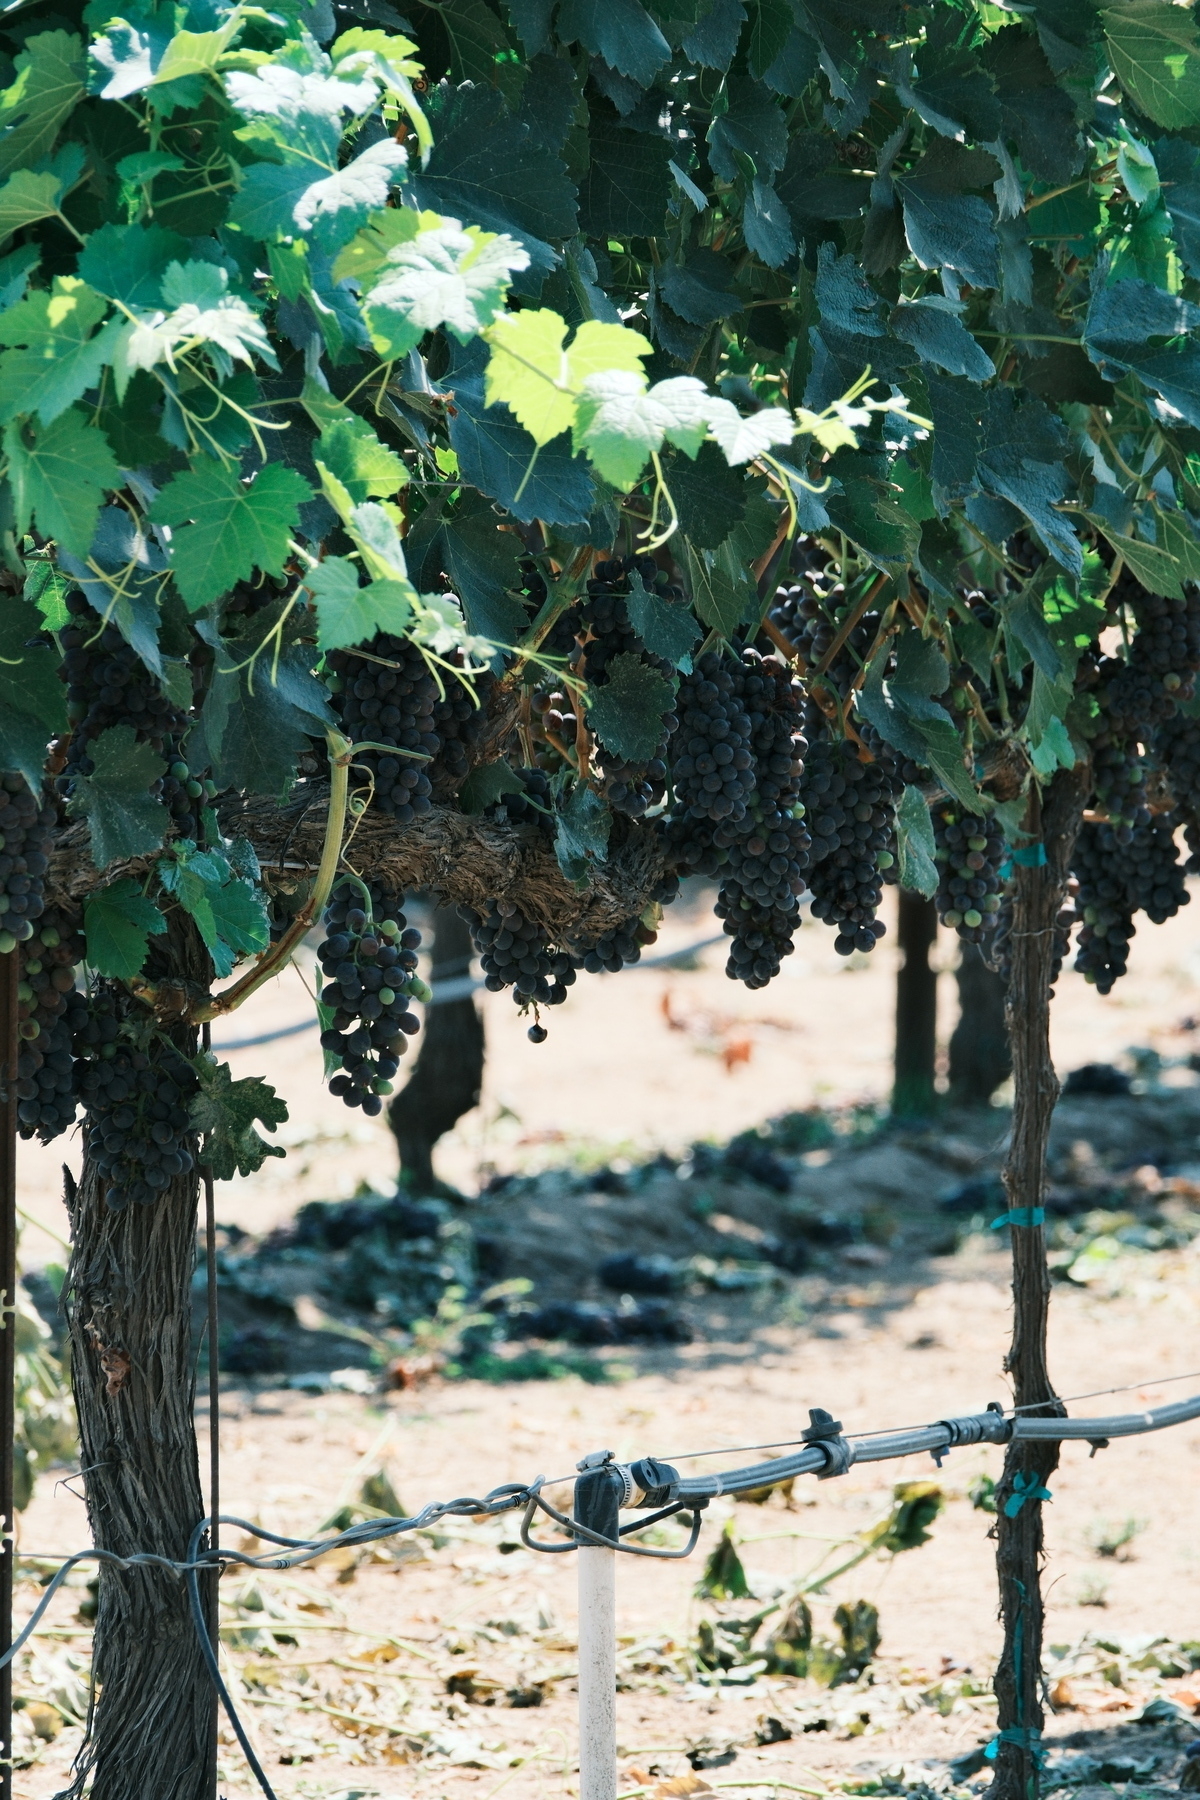 Many bunches of Syrah grapes that are nearly ripe dark purple hanging from lush grapevines during a sunny day.